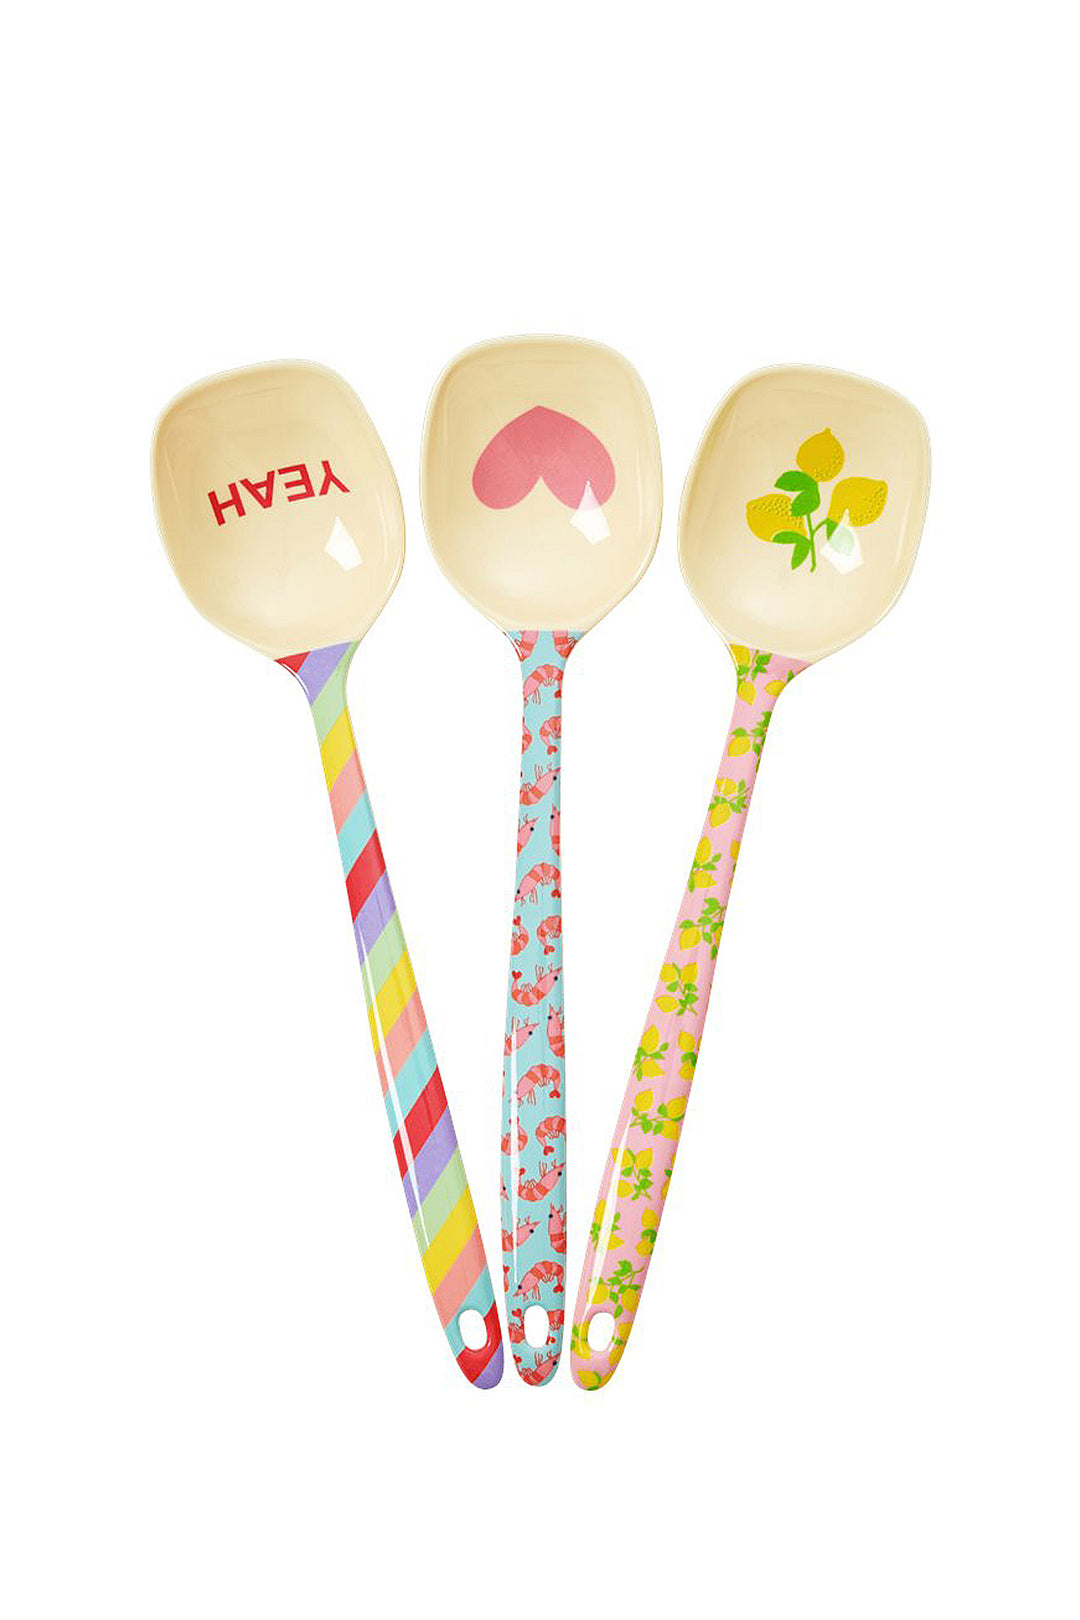 Yippie Yippie Yeah Melamine Cooking Spoon